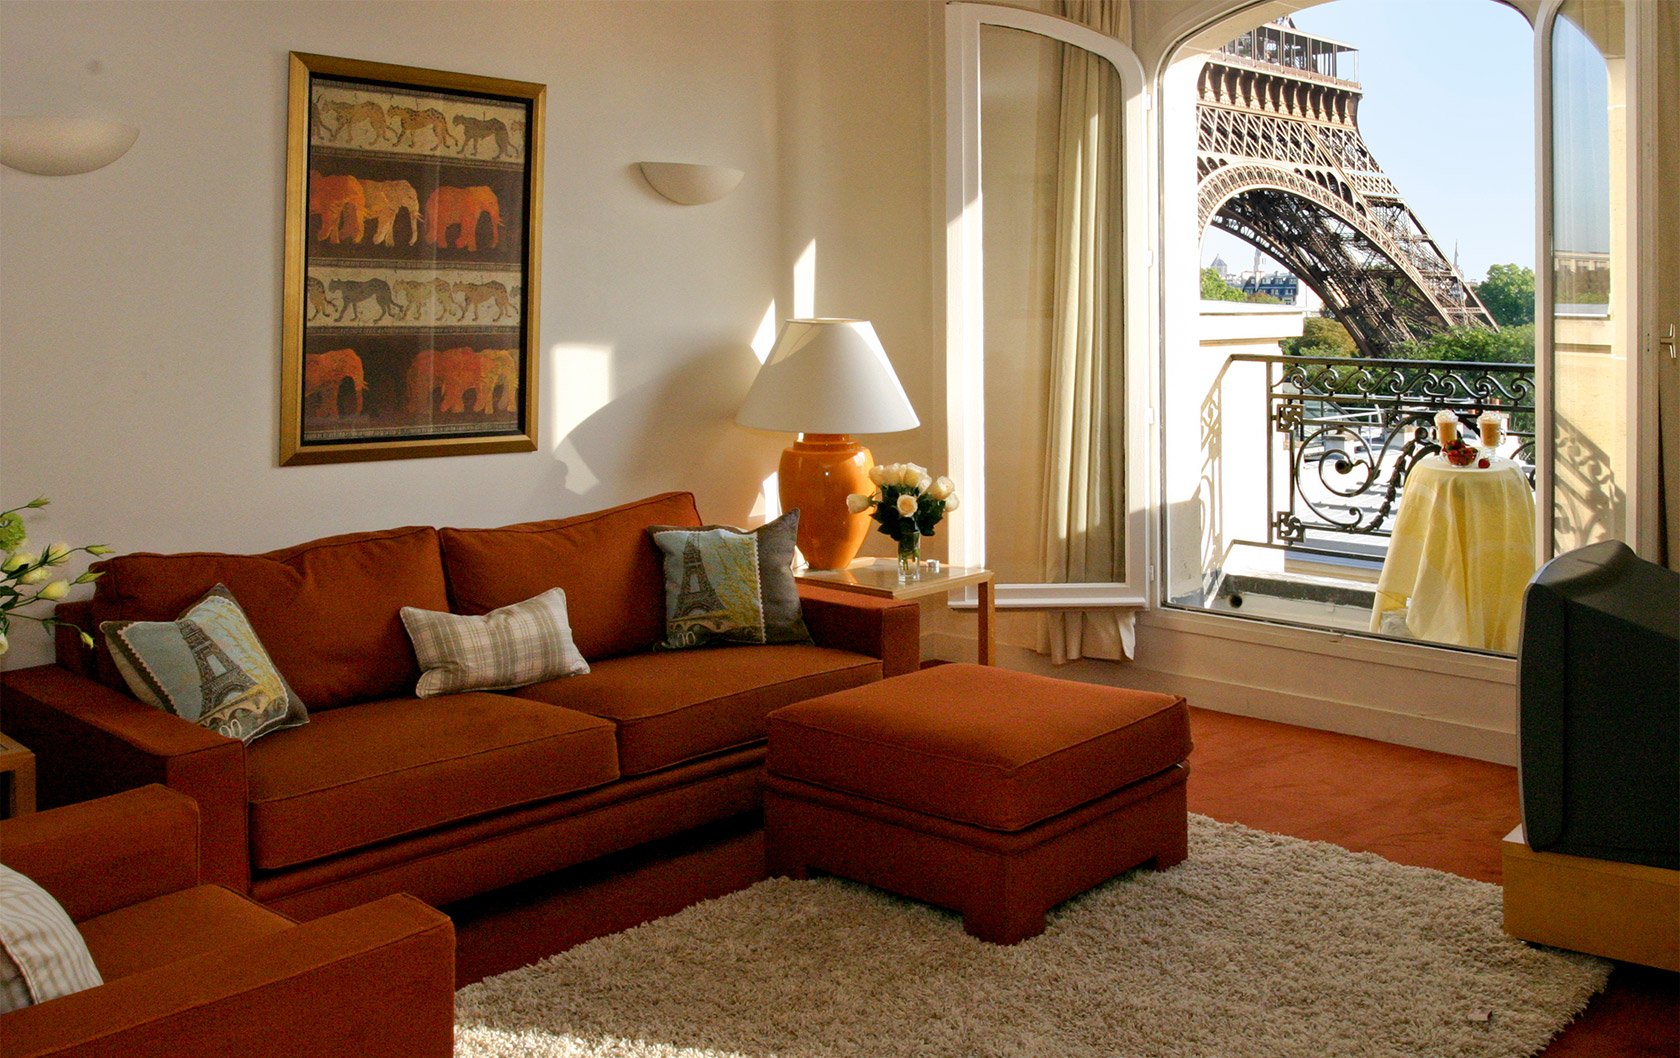 Finding the Right Vacation Rentals in Paris